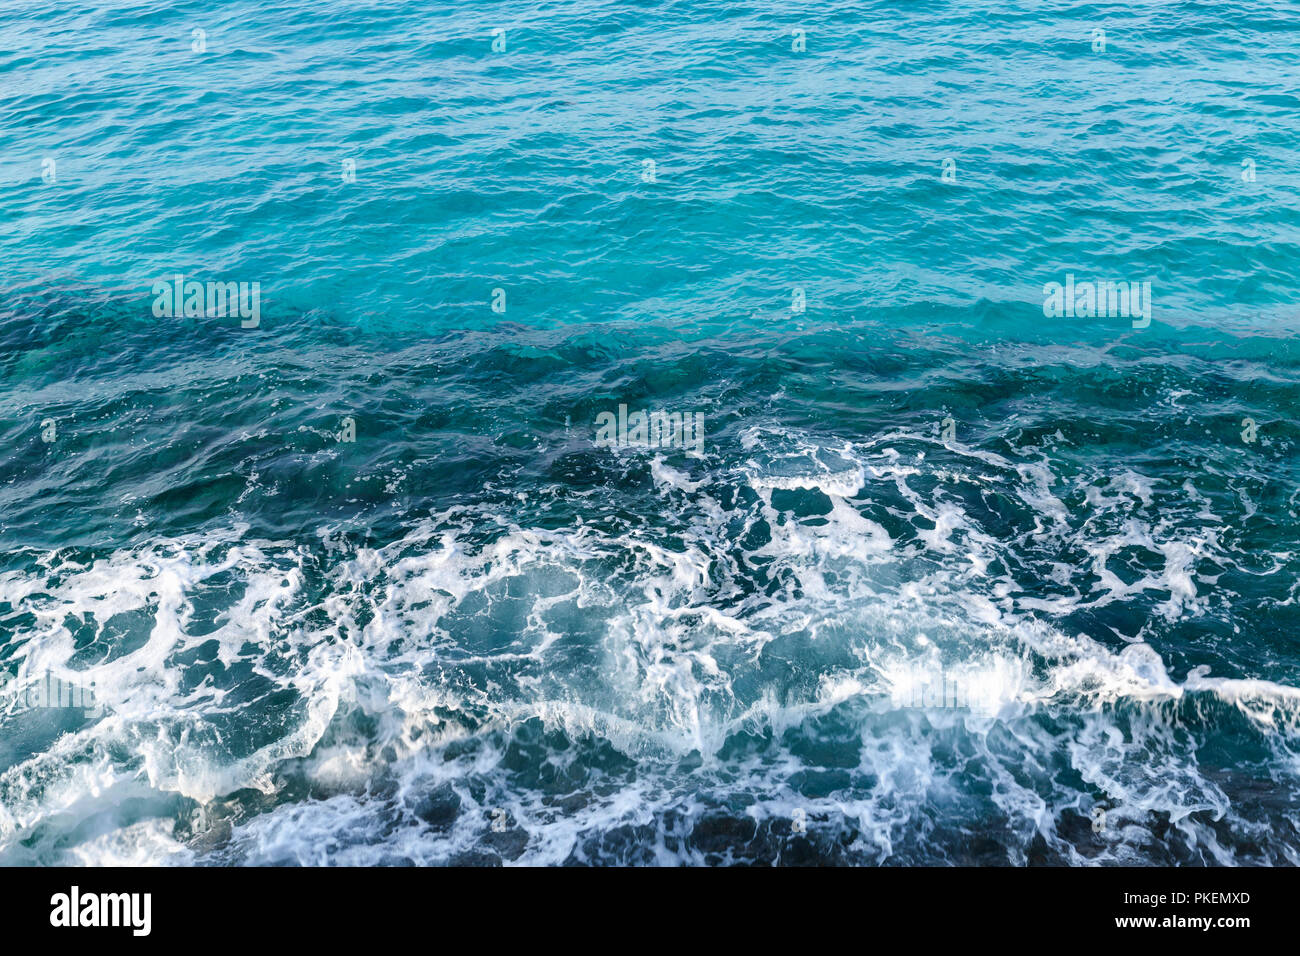 Deep blue water with shore foam, background photo taken from coast of Cyprus island, Mediterranean Sea Stock Photo